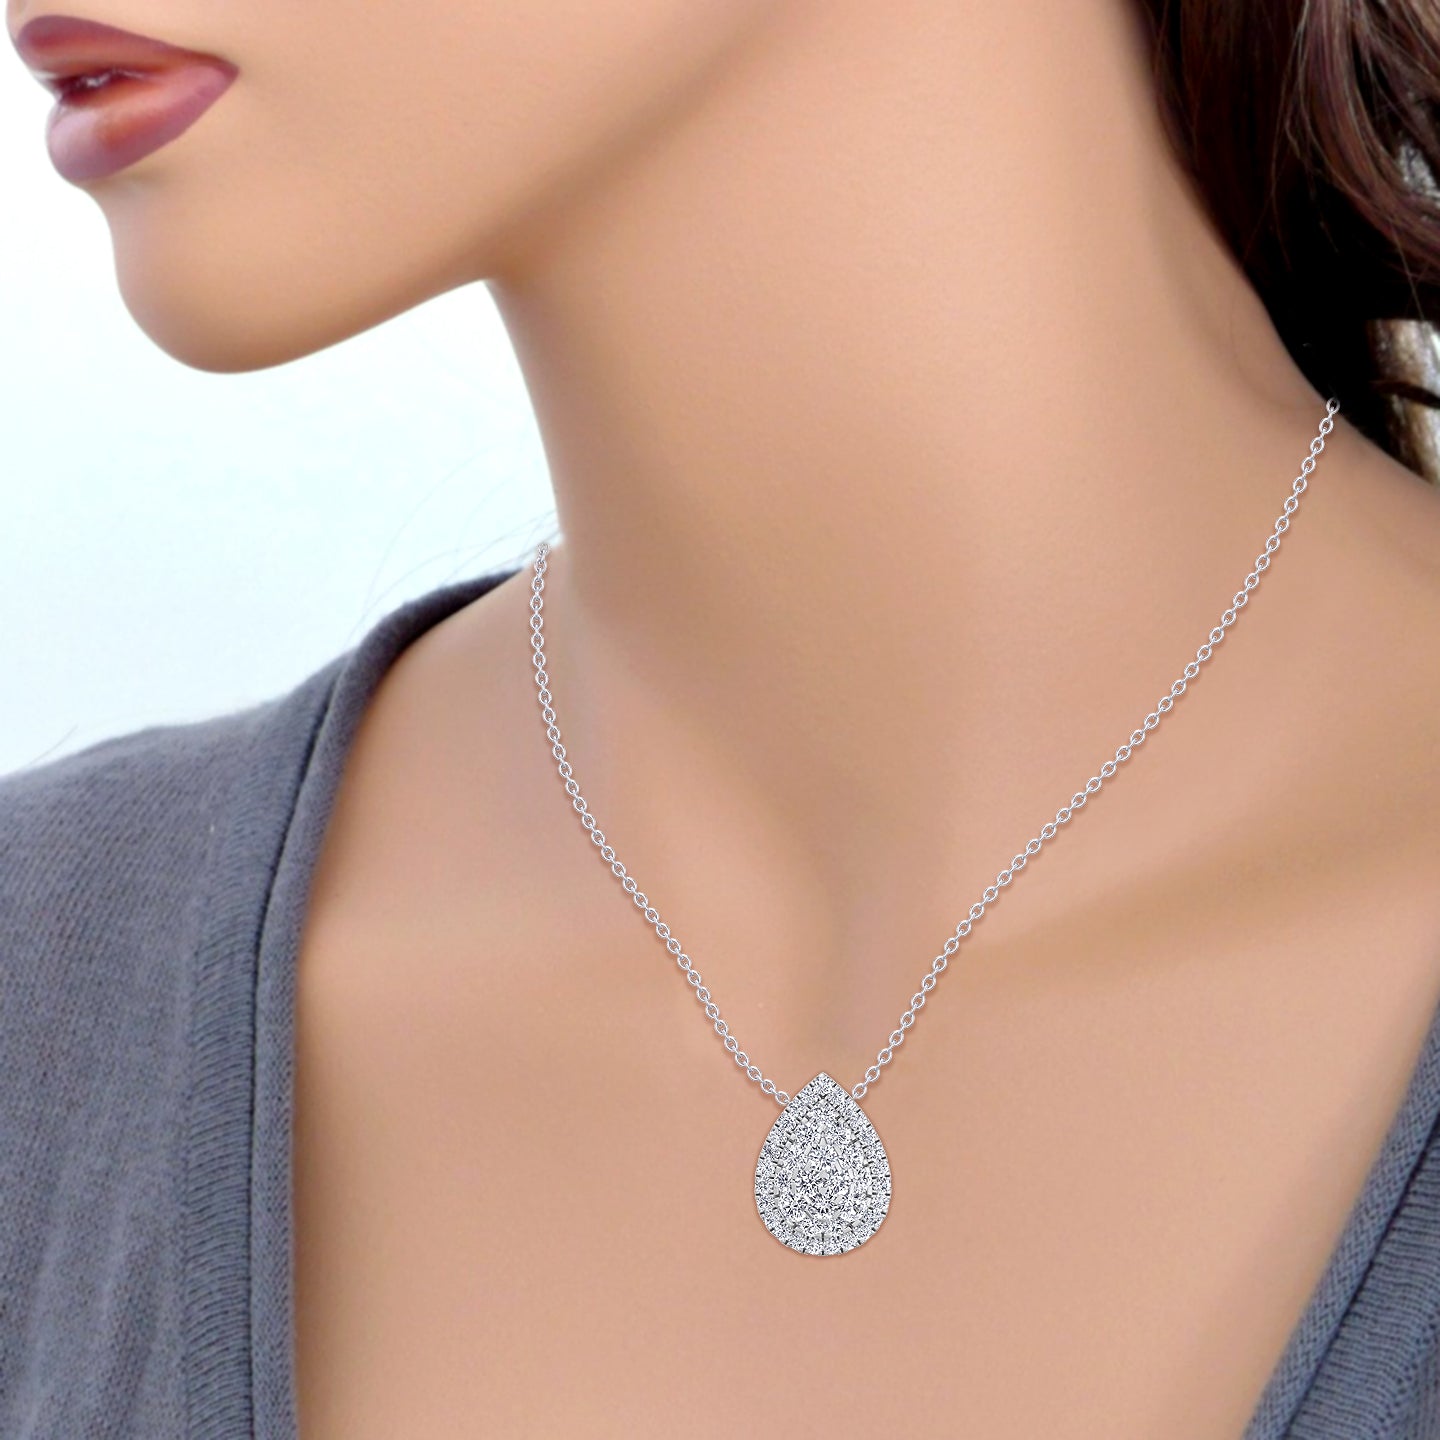 86.64 Carat Pear-Shaped Diamond Pendant | necklace, courtesy, pendant | We  hope this necklace adds some extra sparkle to your day. It features an  86.64 carat pear-shaped diamond pendant graded D color,